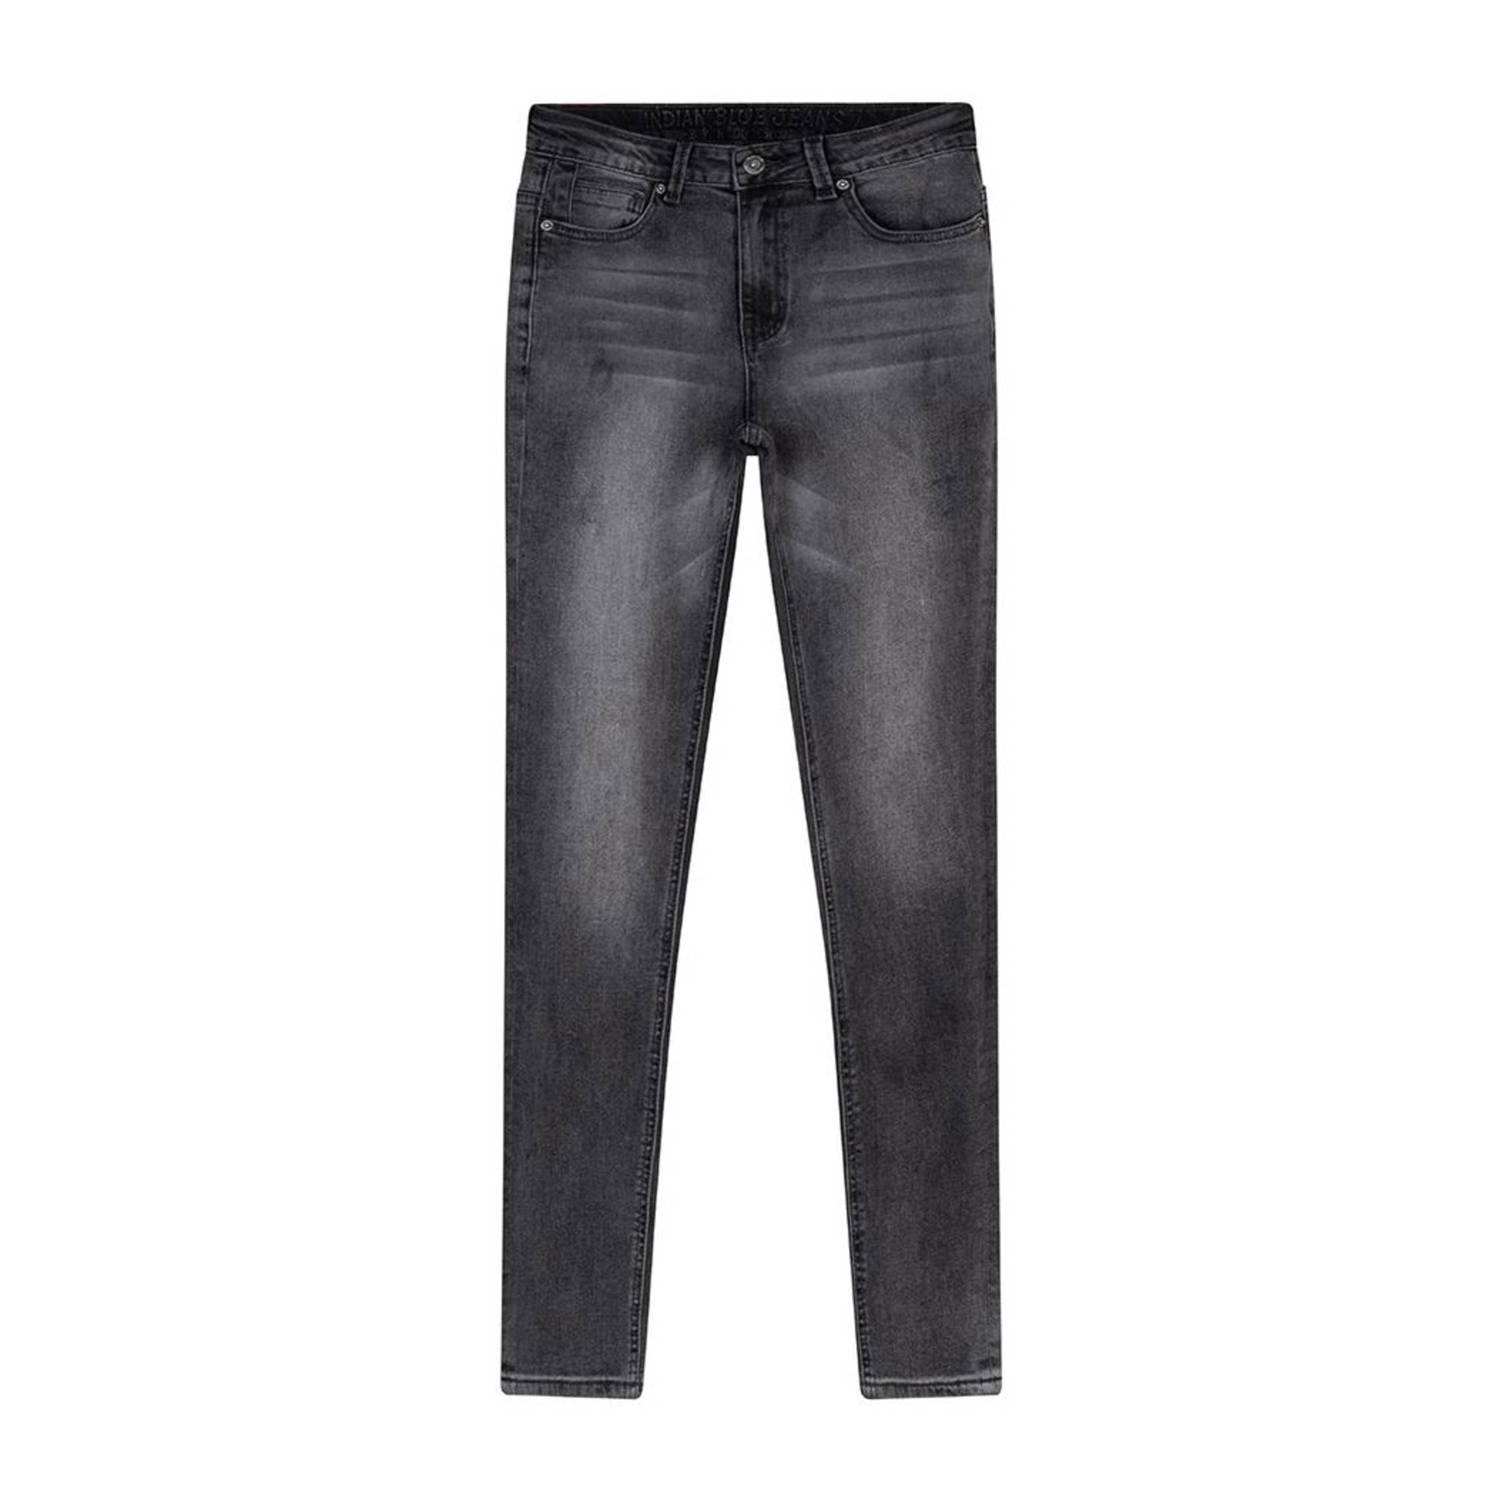 Indian Blue Jeans tapered fit jeans Jay dark grey denim